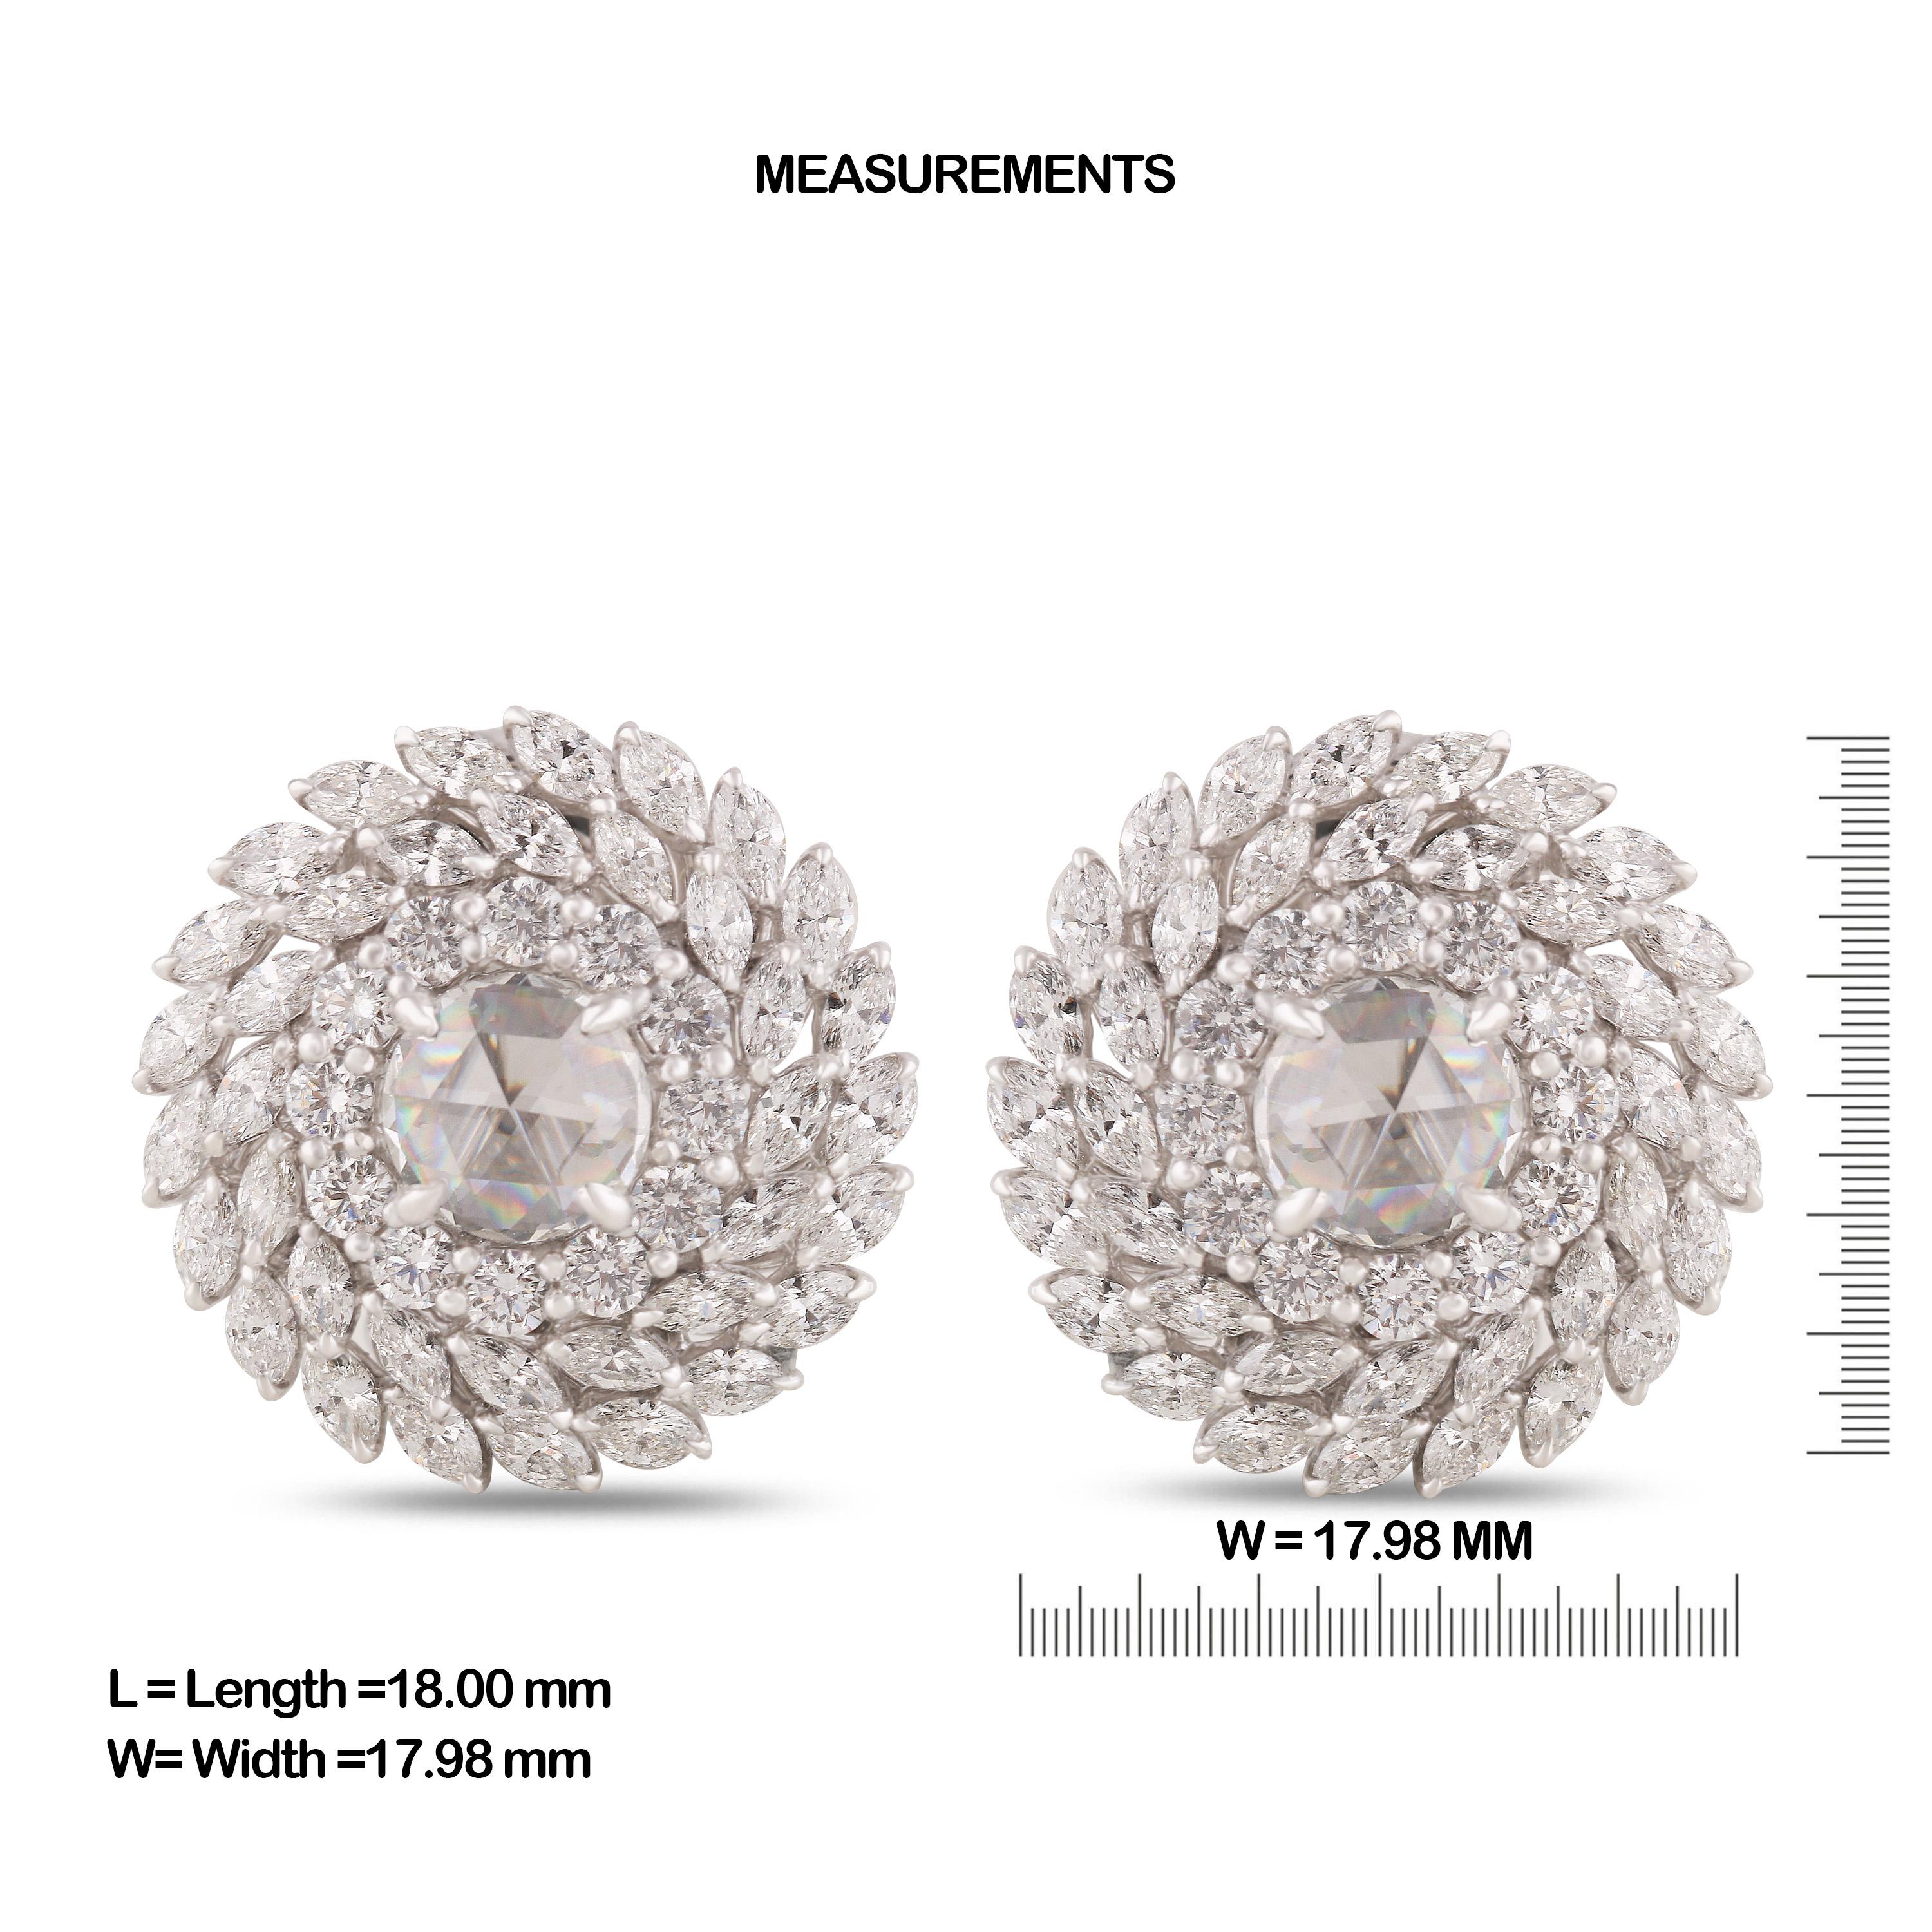 Gross Weight: 11.82 Grams
Diamond Weight: 4.010 cts
IGI Certification can be done on request.

Video of the product can be shared on request.

Carefully handcrafted, delicately cut, and effortlessly elegant, these 18K white gold statement stud